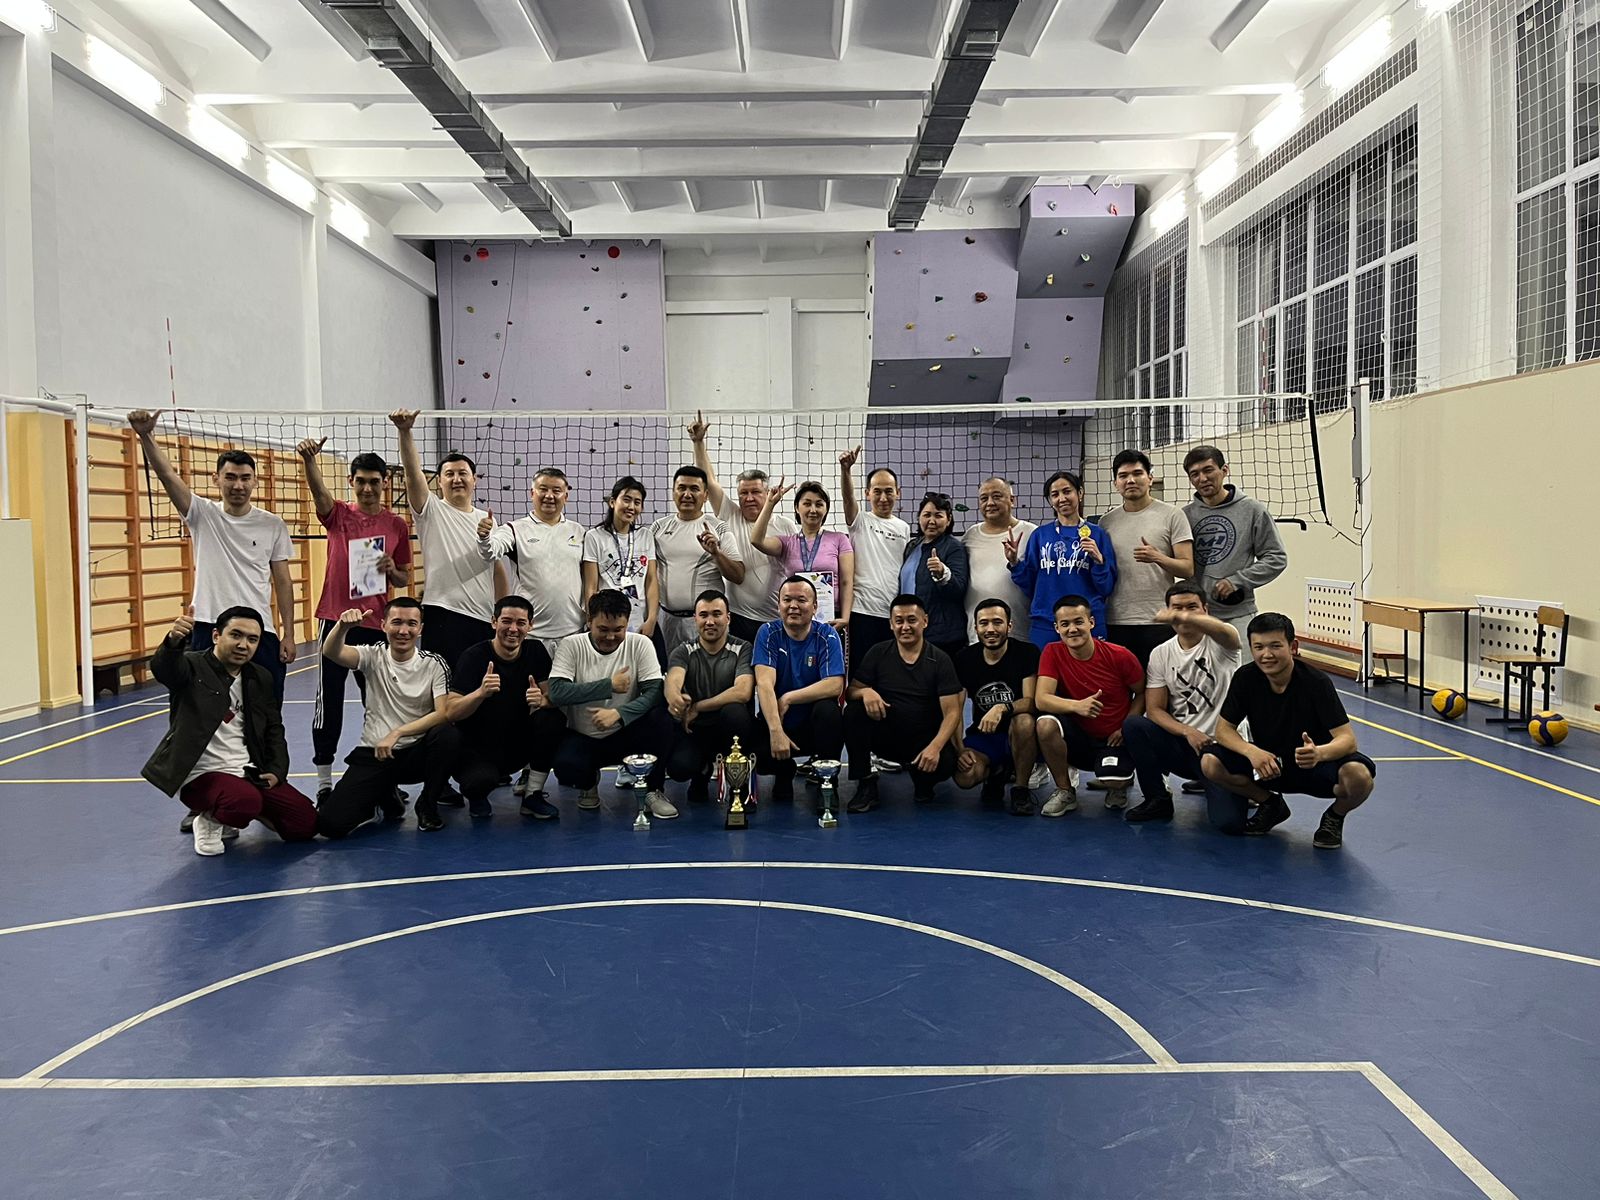 The Almaty volleyball tournament was held among civil servants of territorial divisions of the Ministry of Trade and Integration of the Republic of Kazakhstan